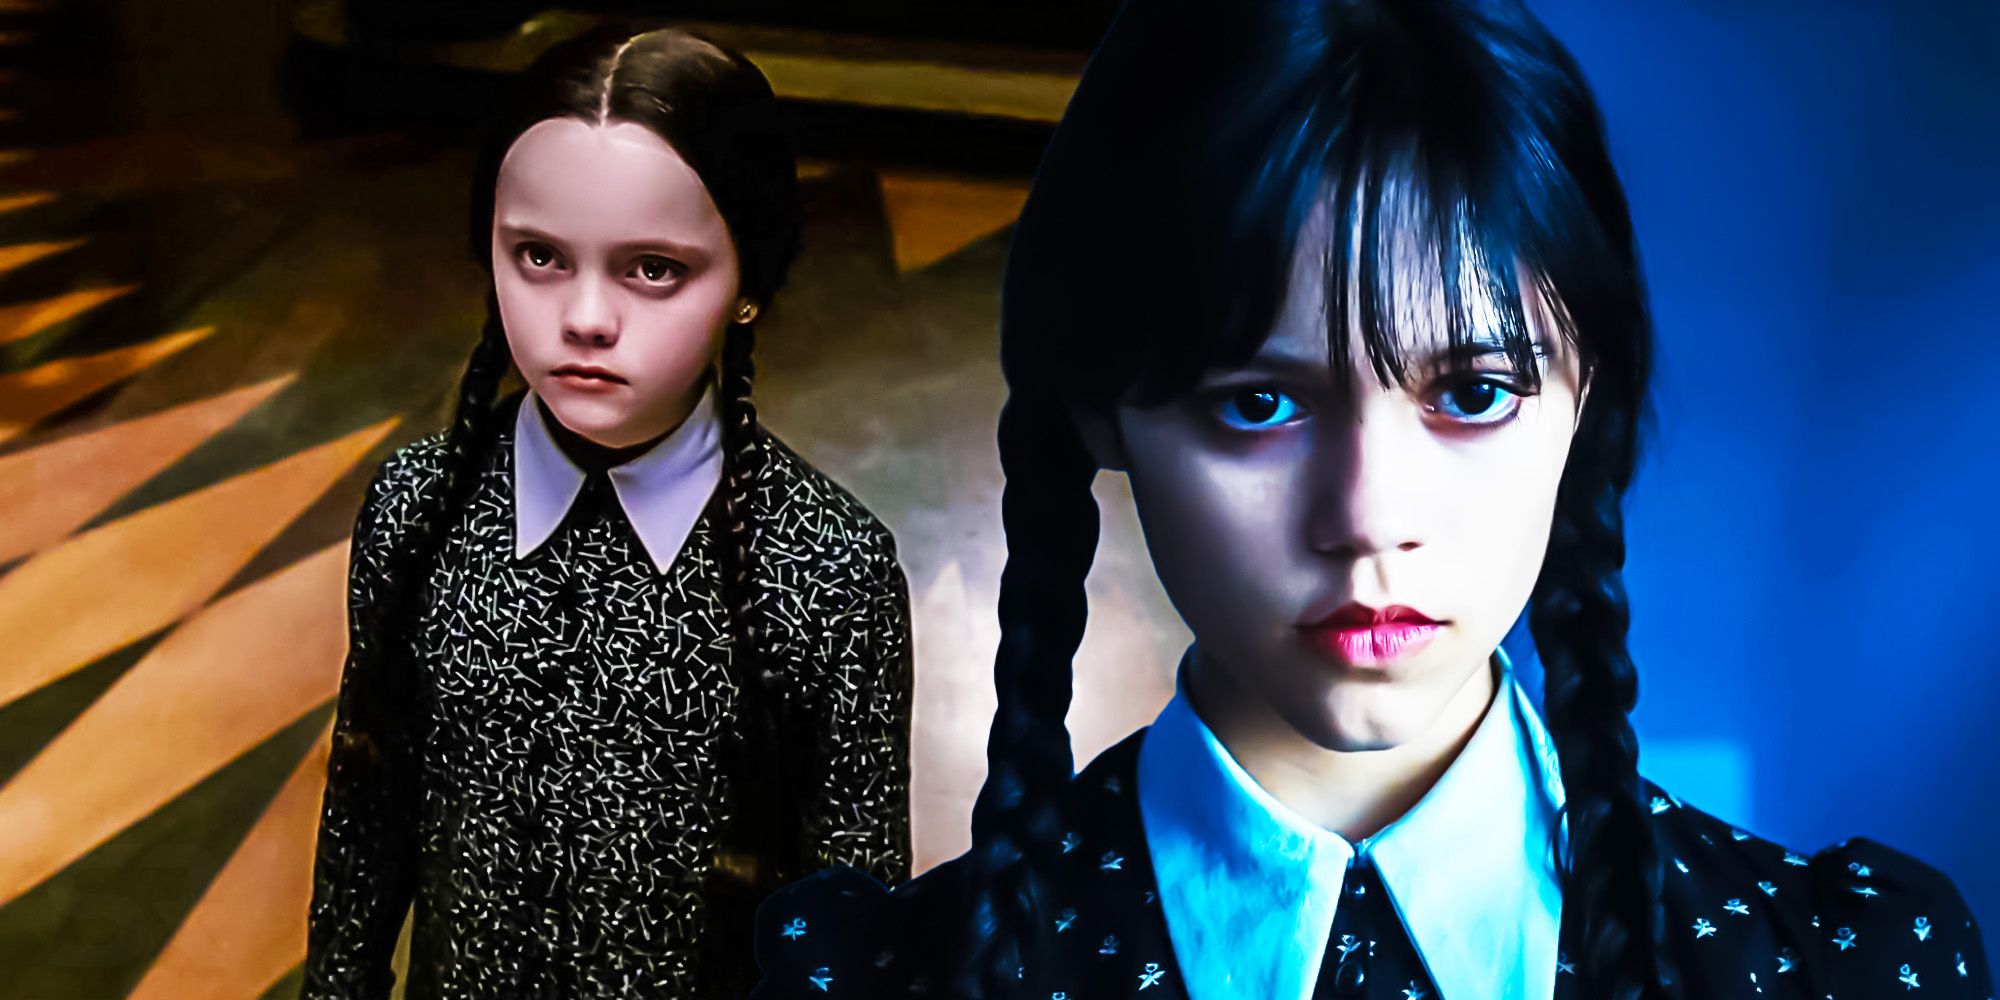 How Old Wednesday Is In The Addams Family Movies (& Netflix Show)